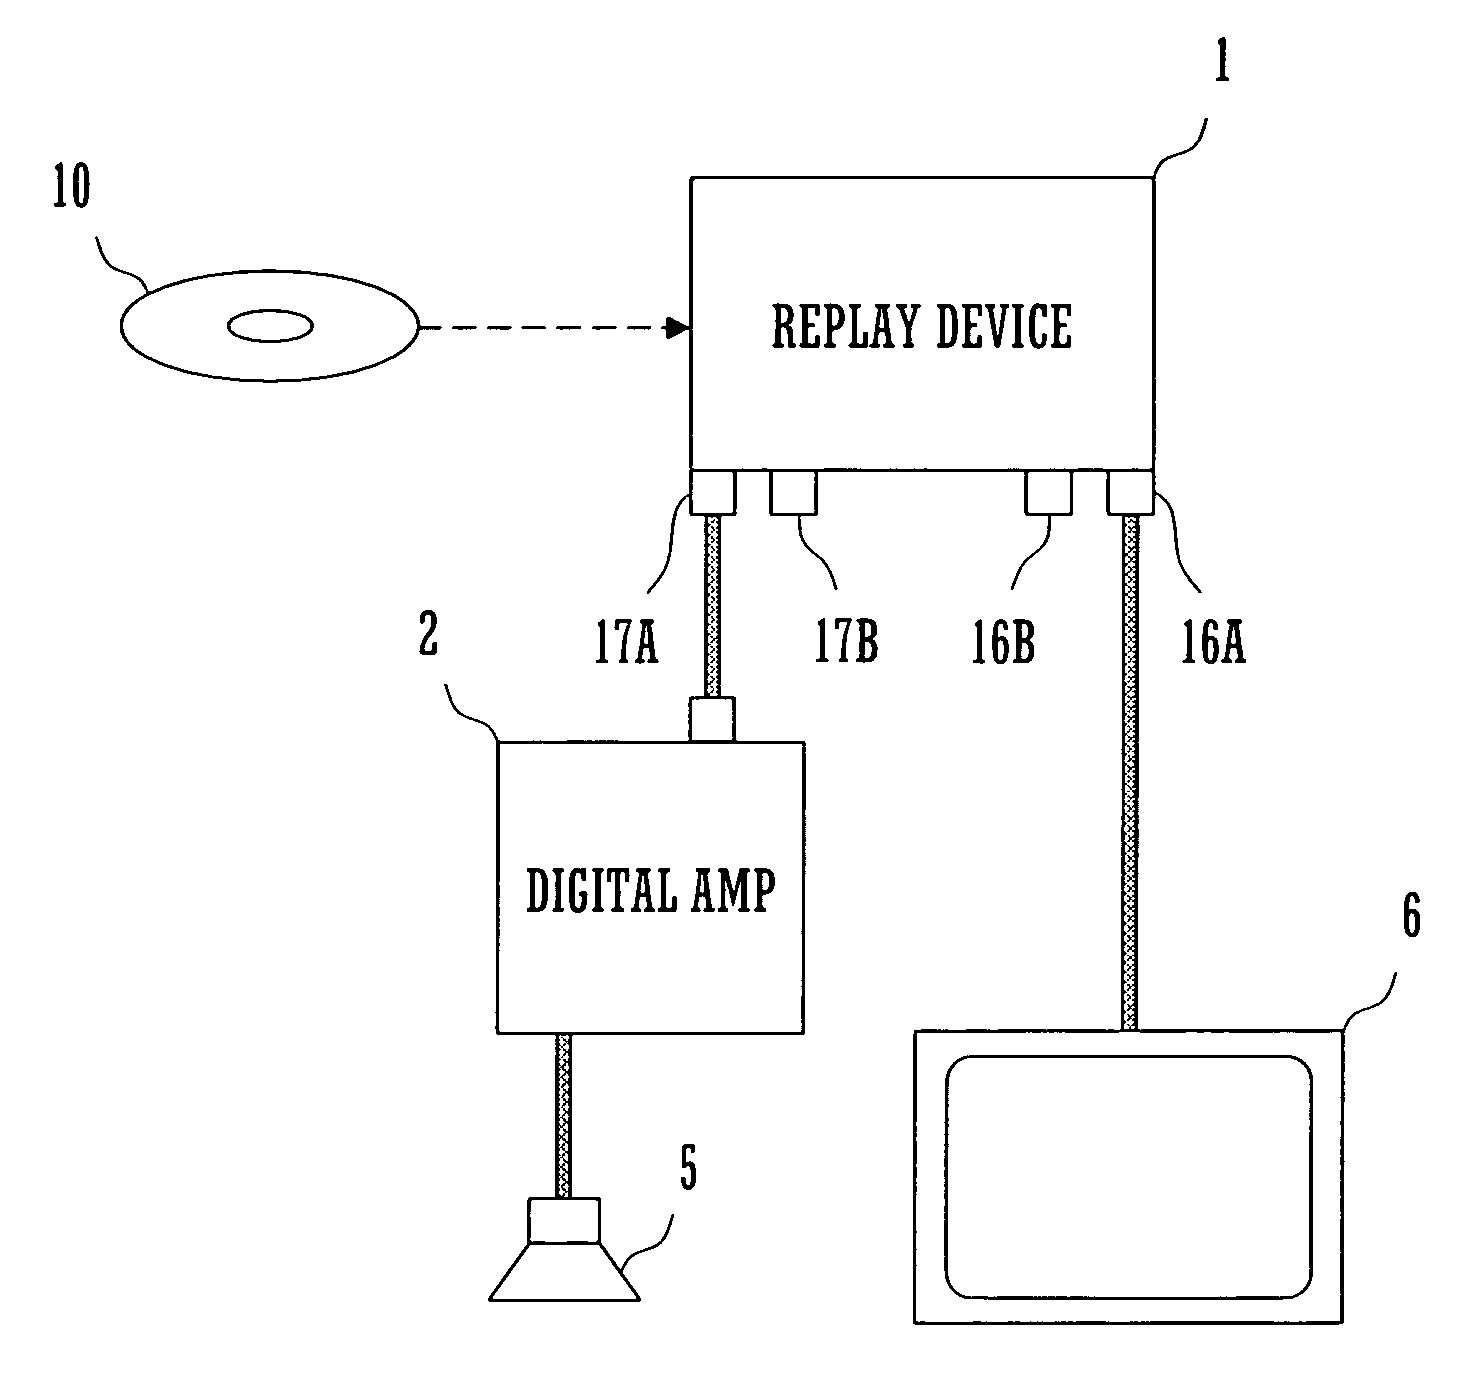 Optical disk replay device